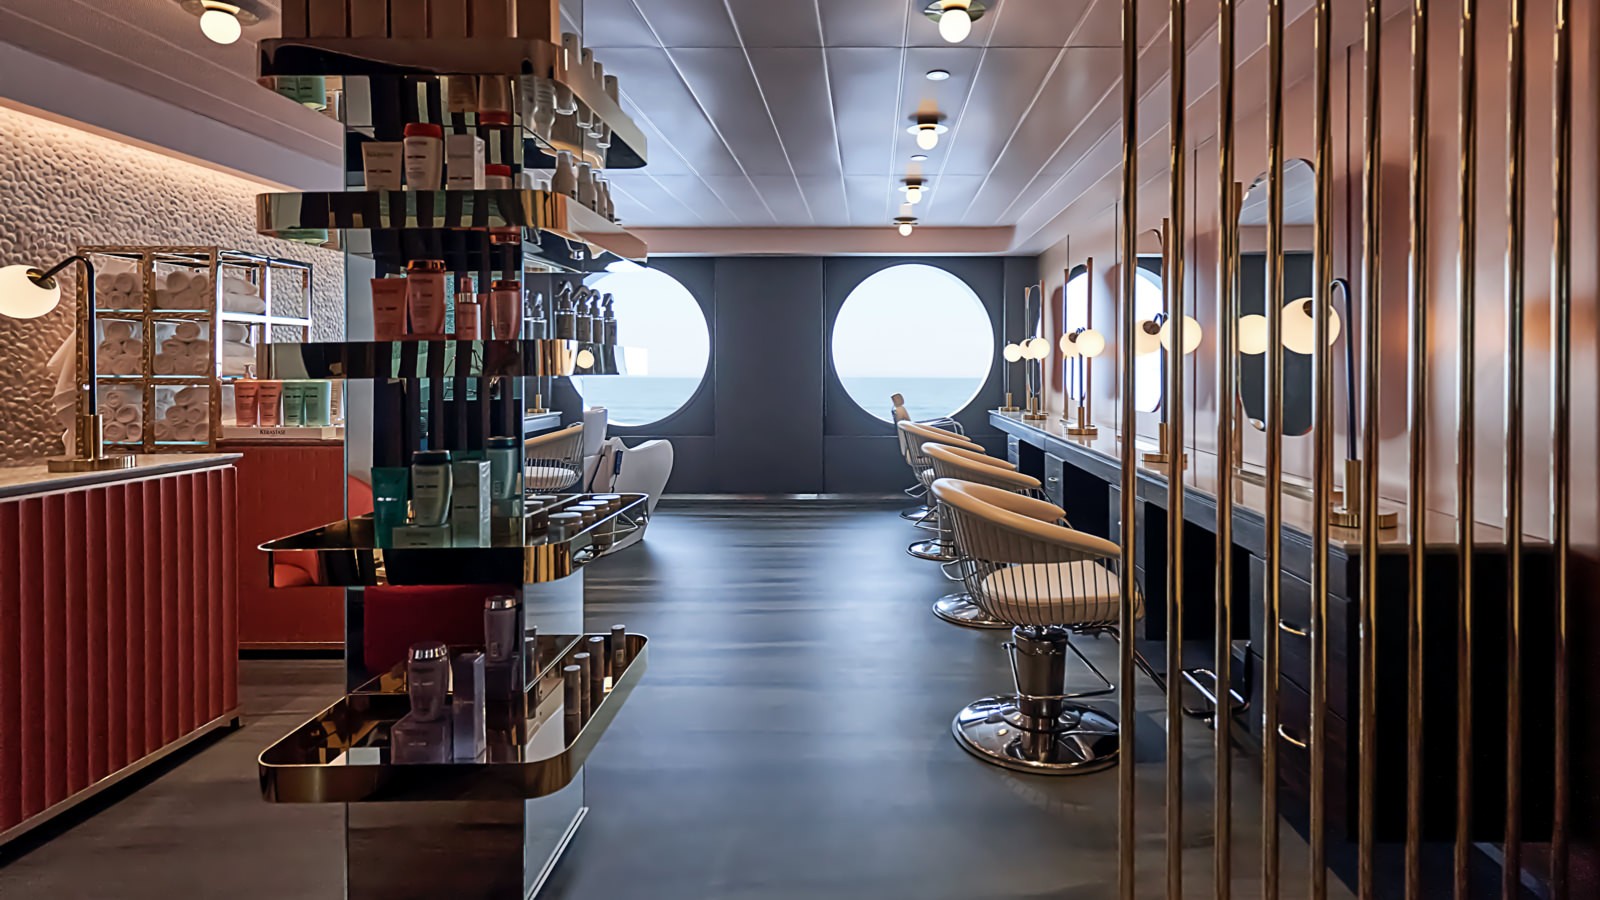 Virgin Voyages makes wellness a priority on board